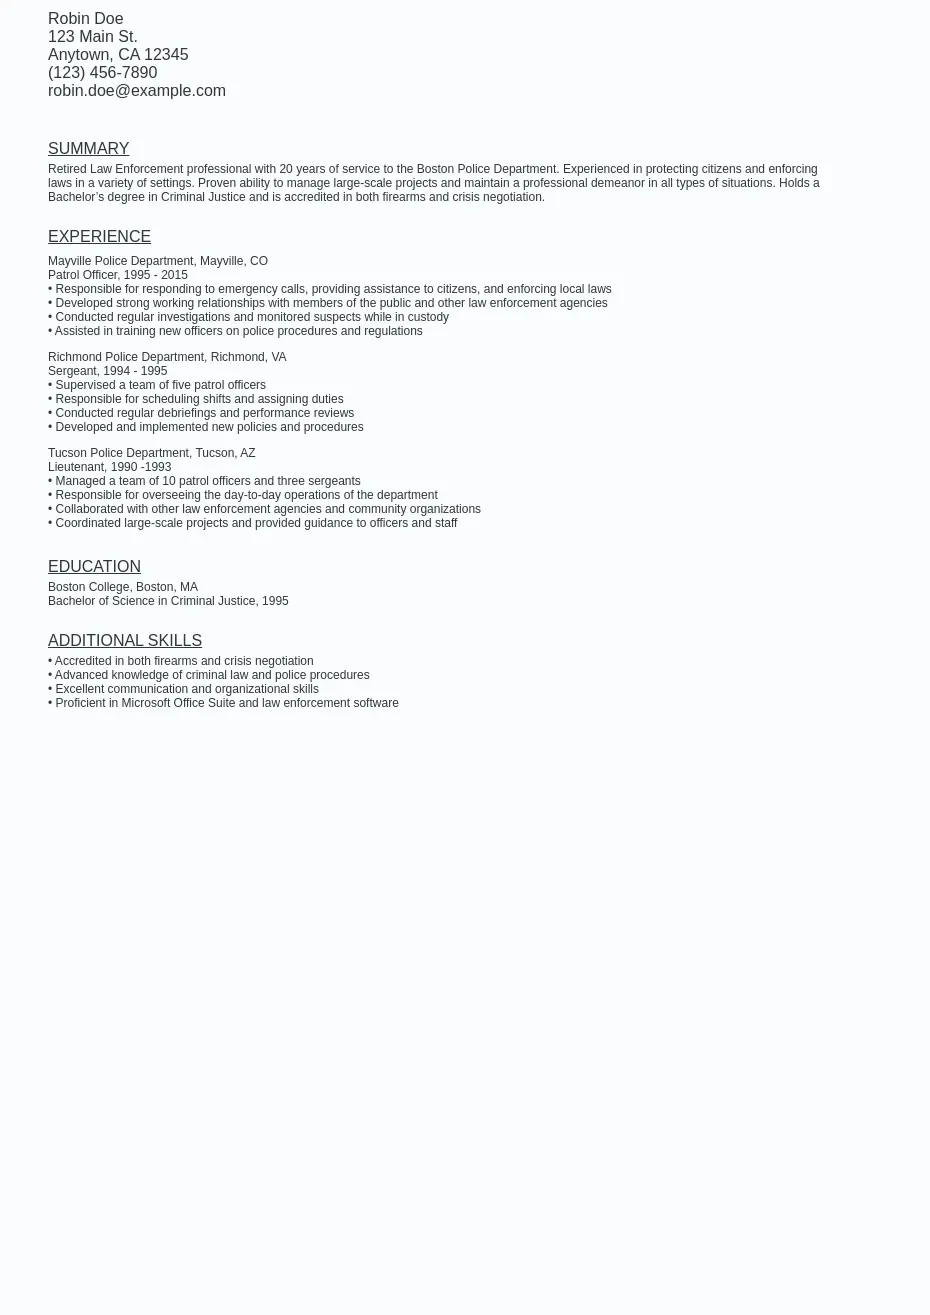 Sample resume template for Retired Law Enforcement, showcasing a clean and professional layout with sections for personal details, experience, education, and skills.